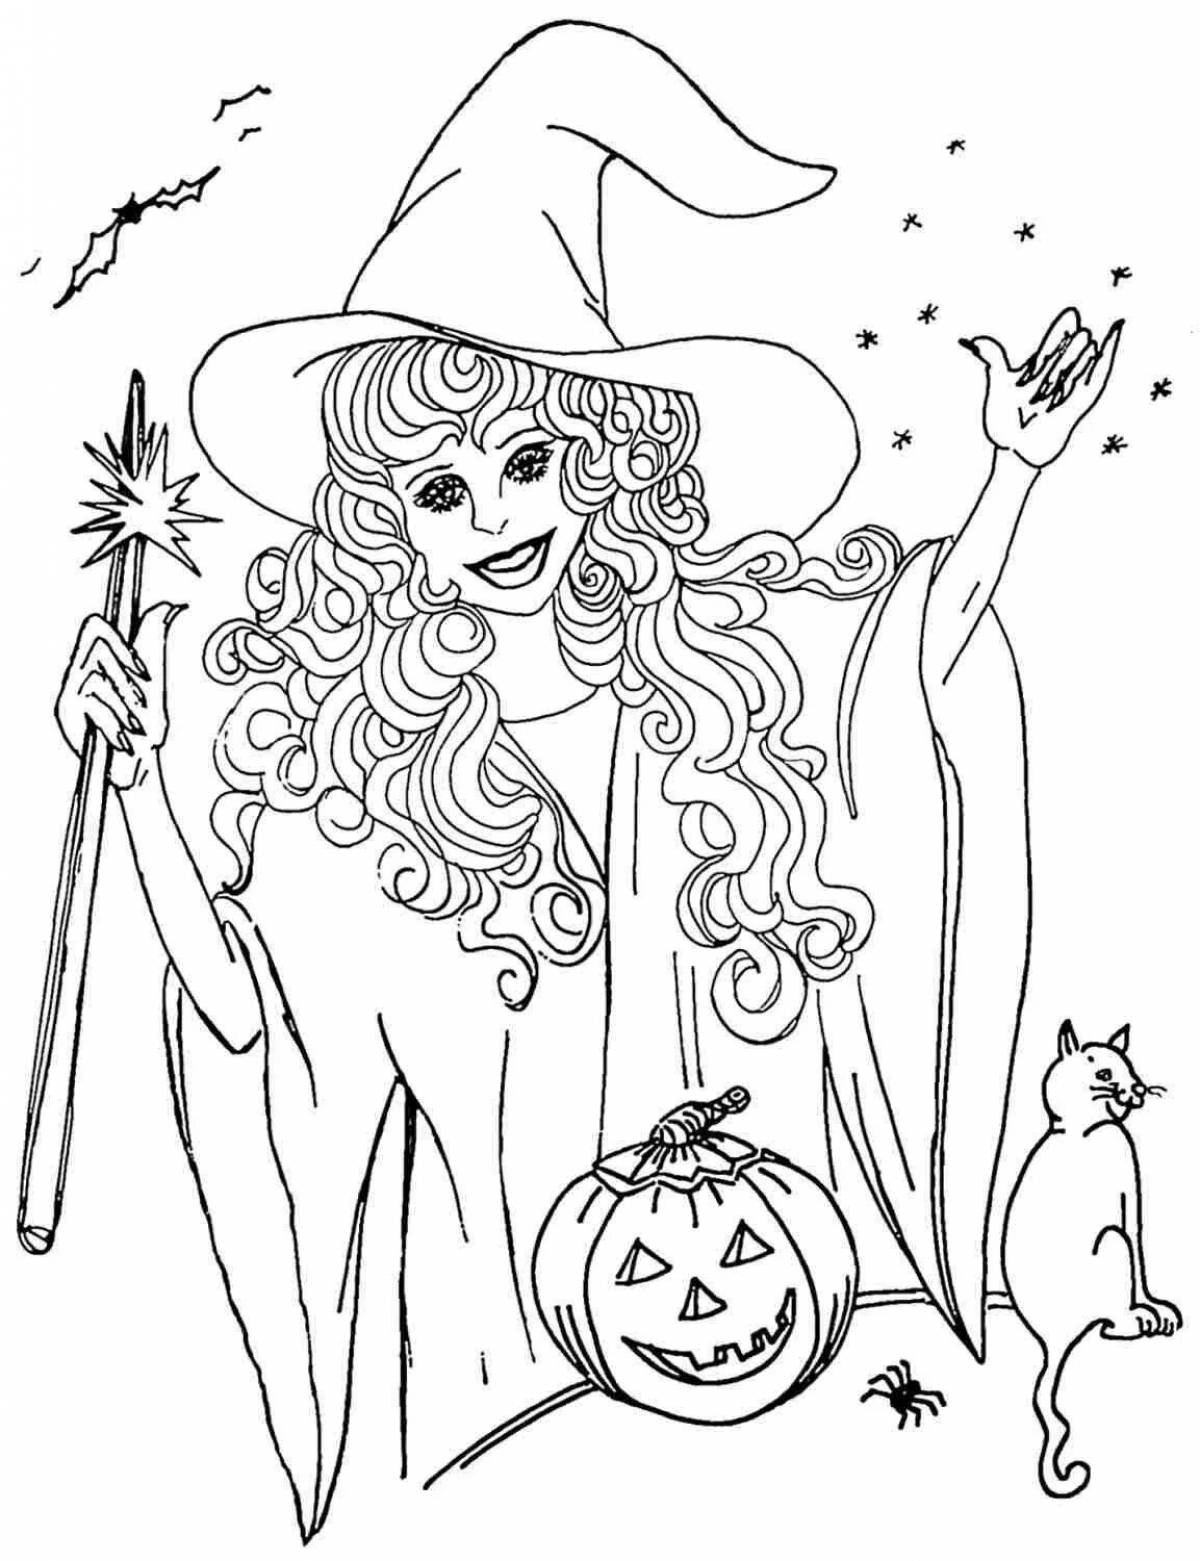 Mystical aya and witch coloring book